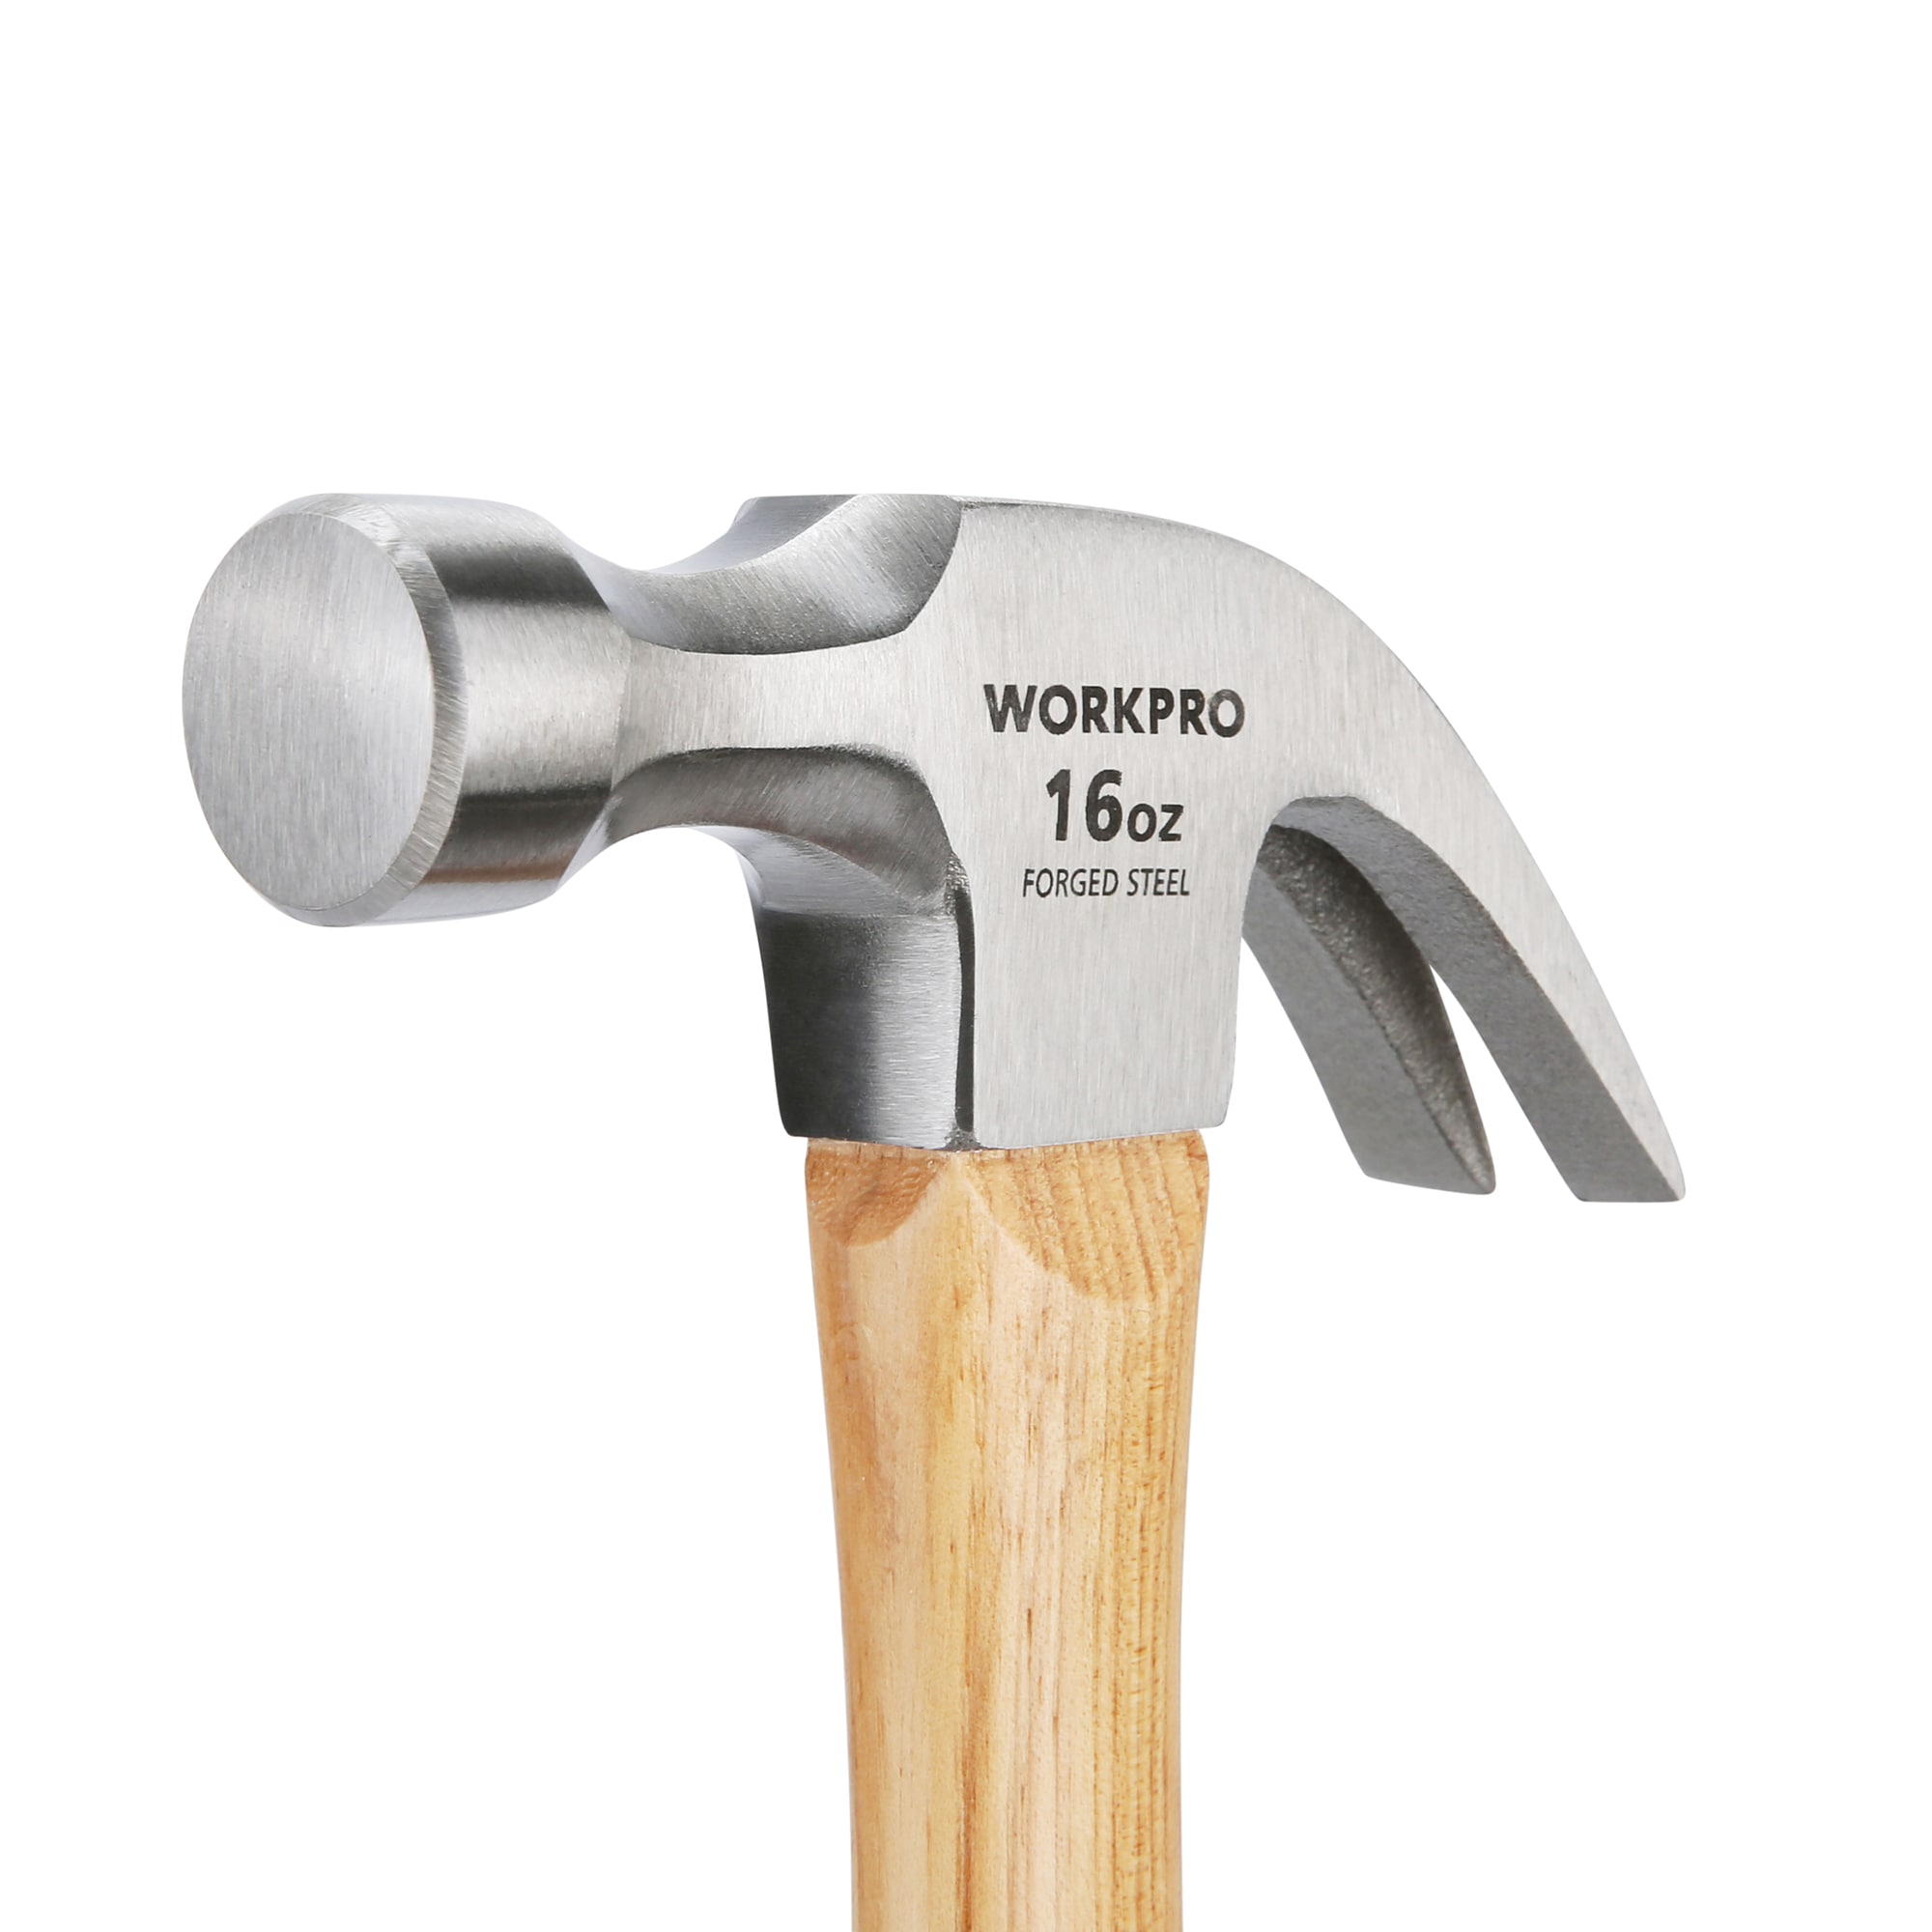 WORKPRO 16-oz Smooth Face Steel Head Fiberglass Claw Hammer in the